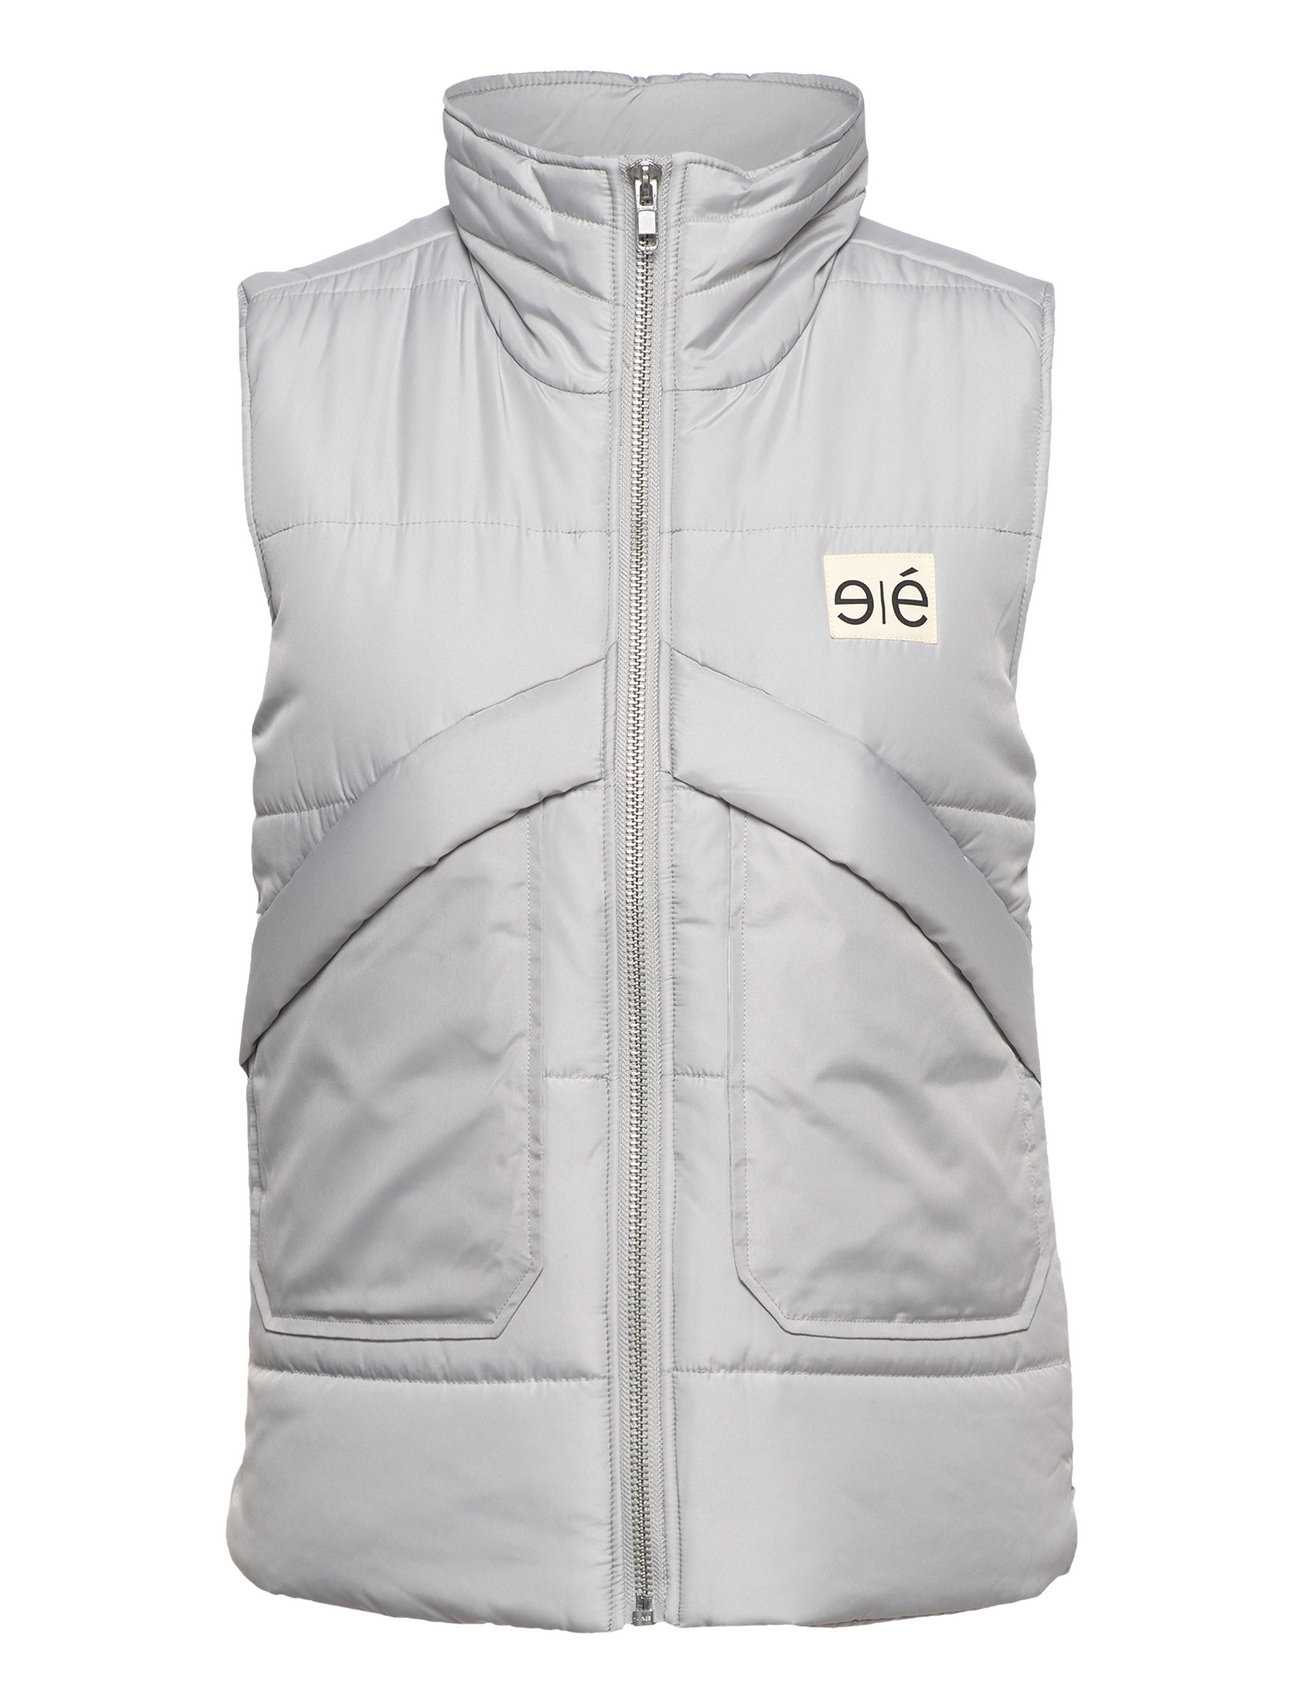 Louis Vuitton Embossed Grained Leather Utility Vest